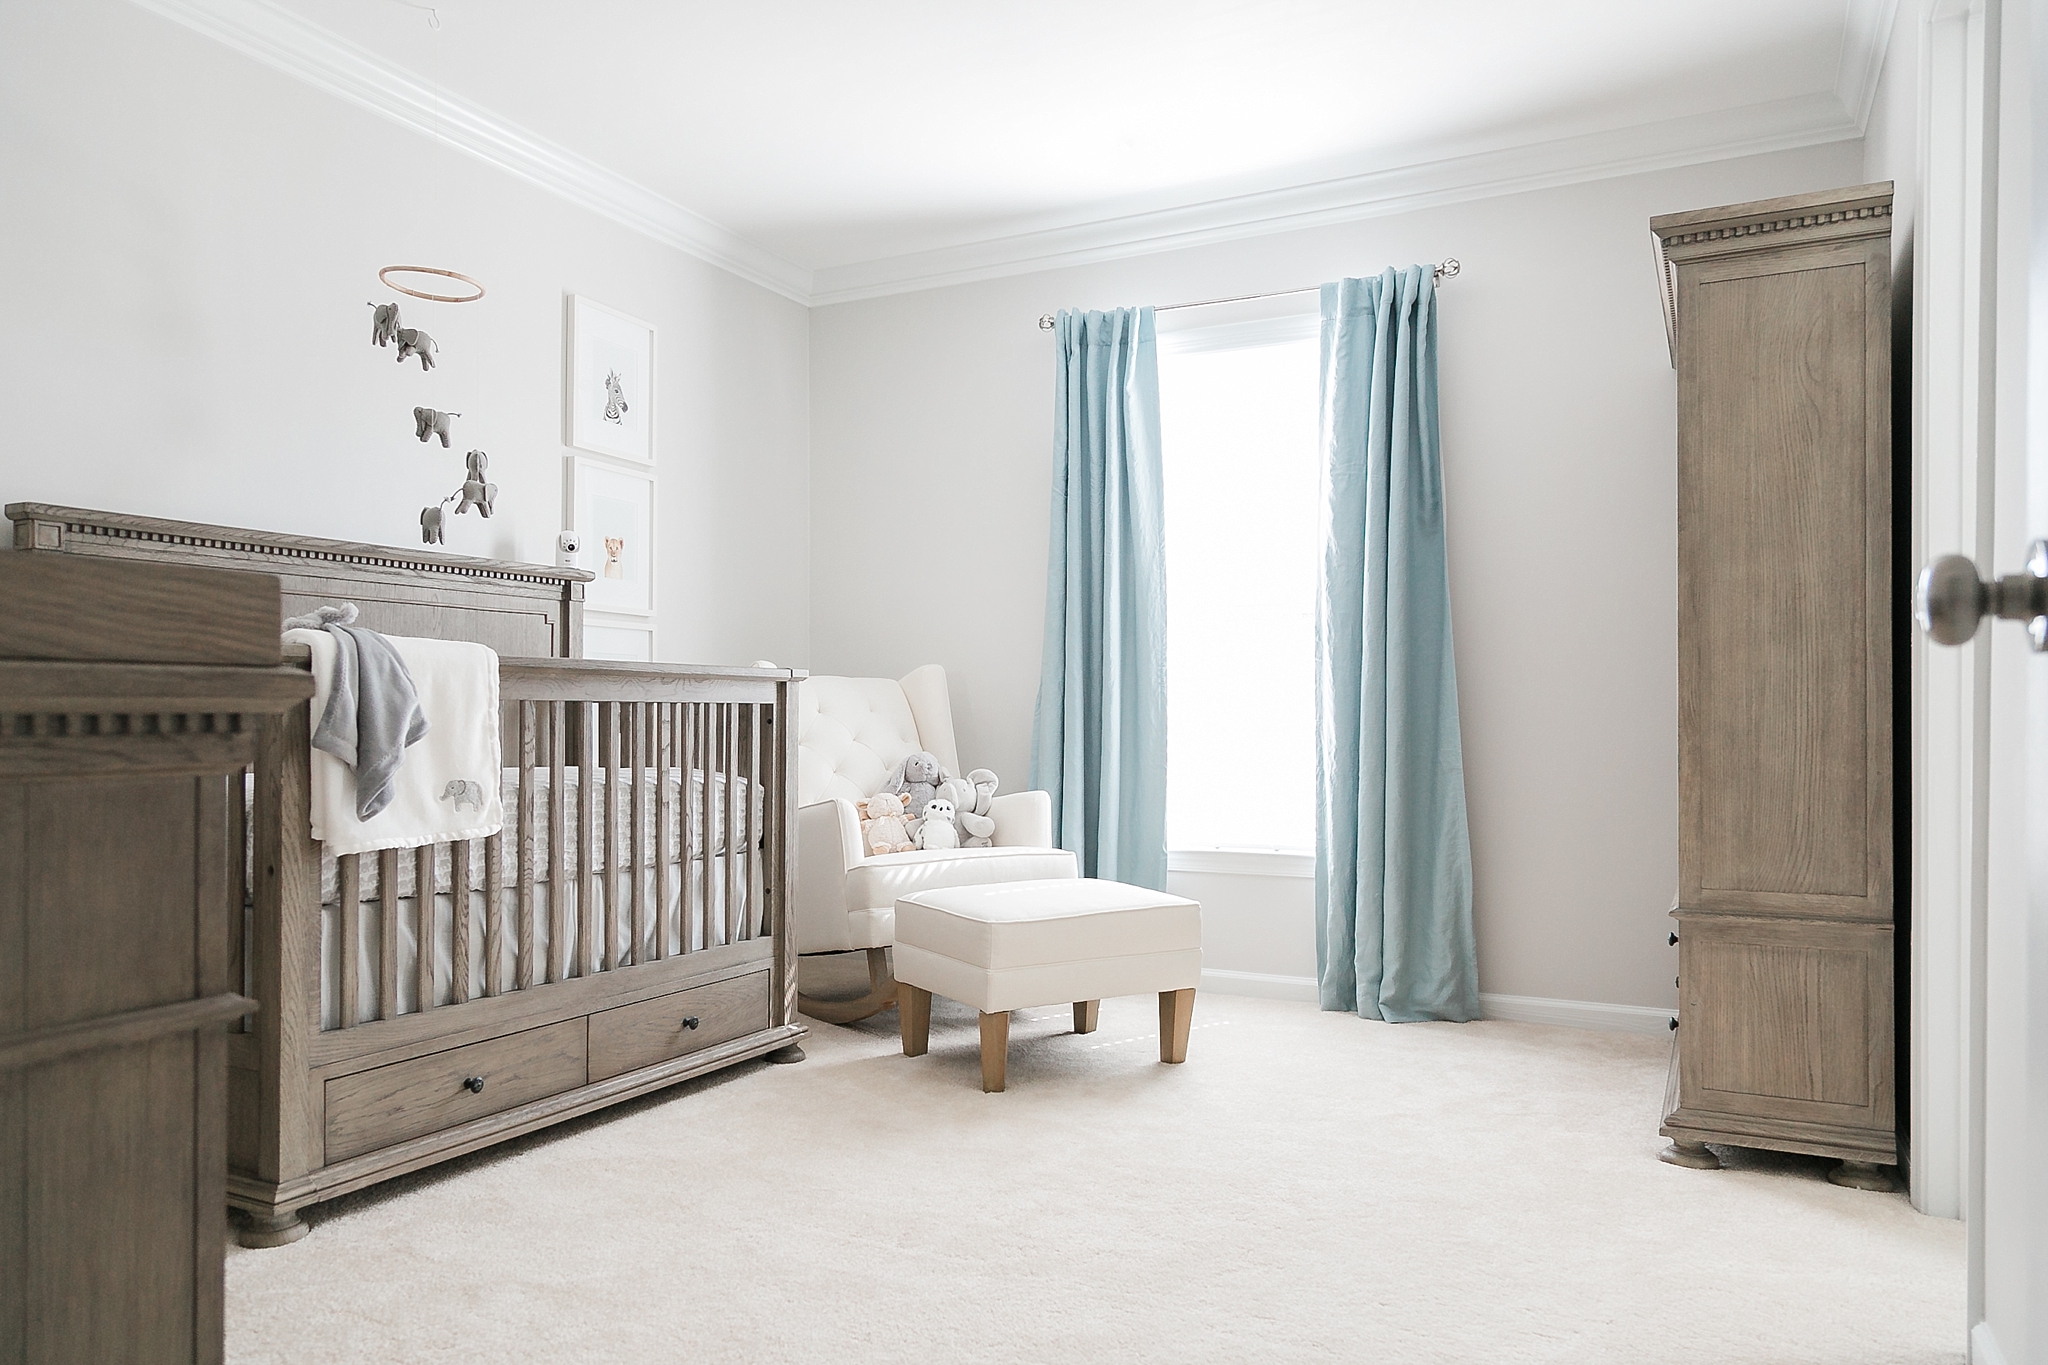 This chic grey and blue nursery for a baby boy features Restoration Hardware furniture, an upgraded closet, and elephant decor.